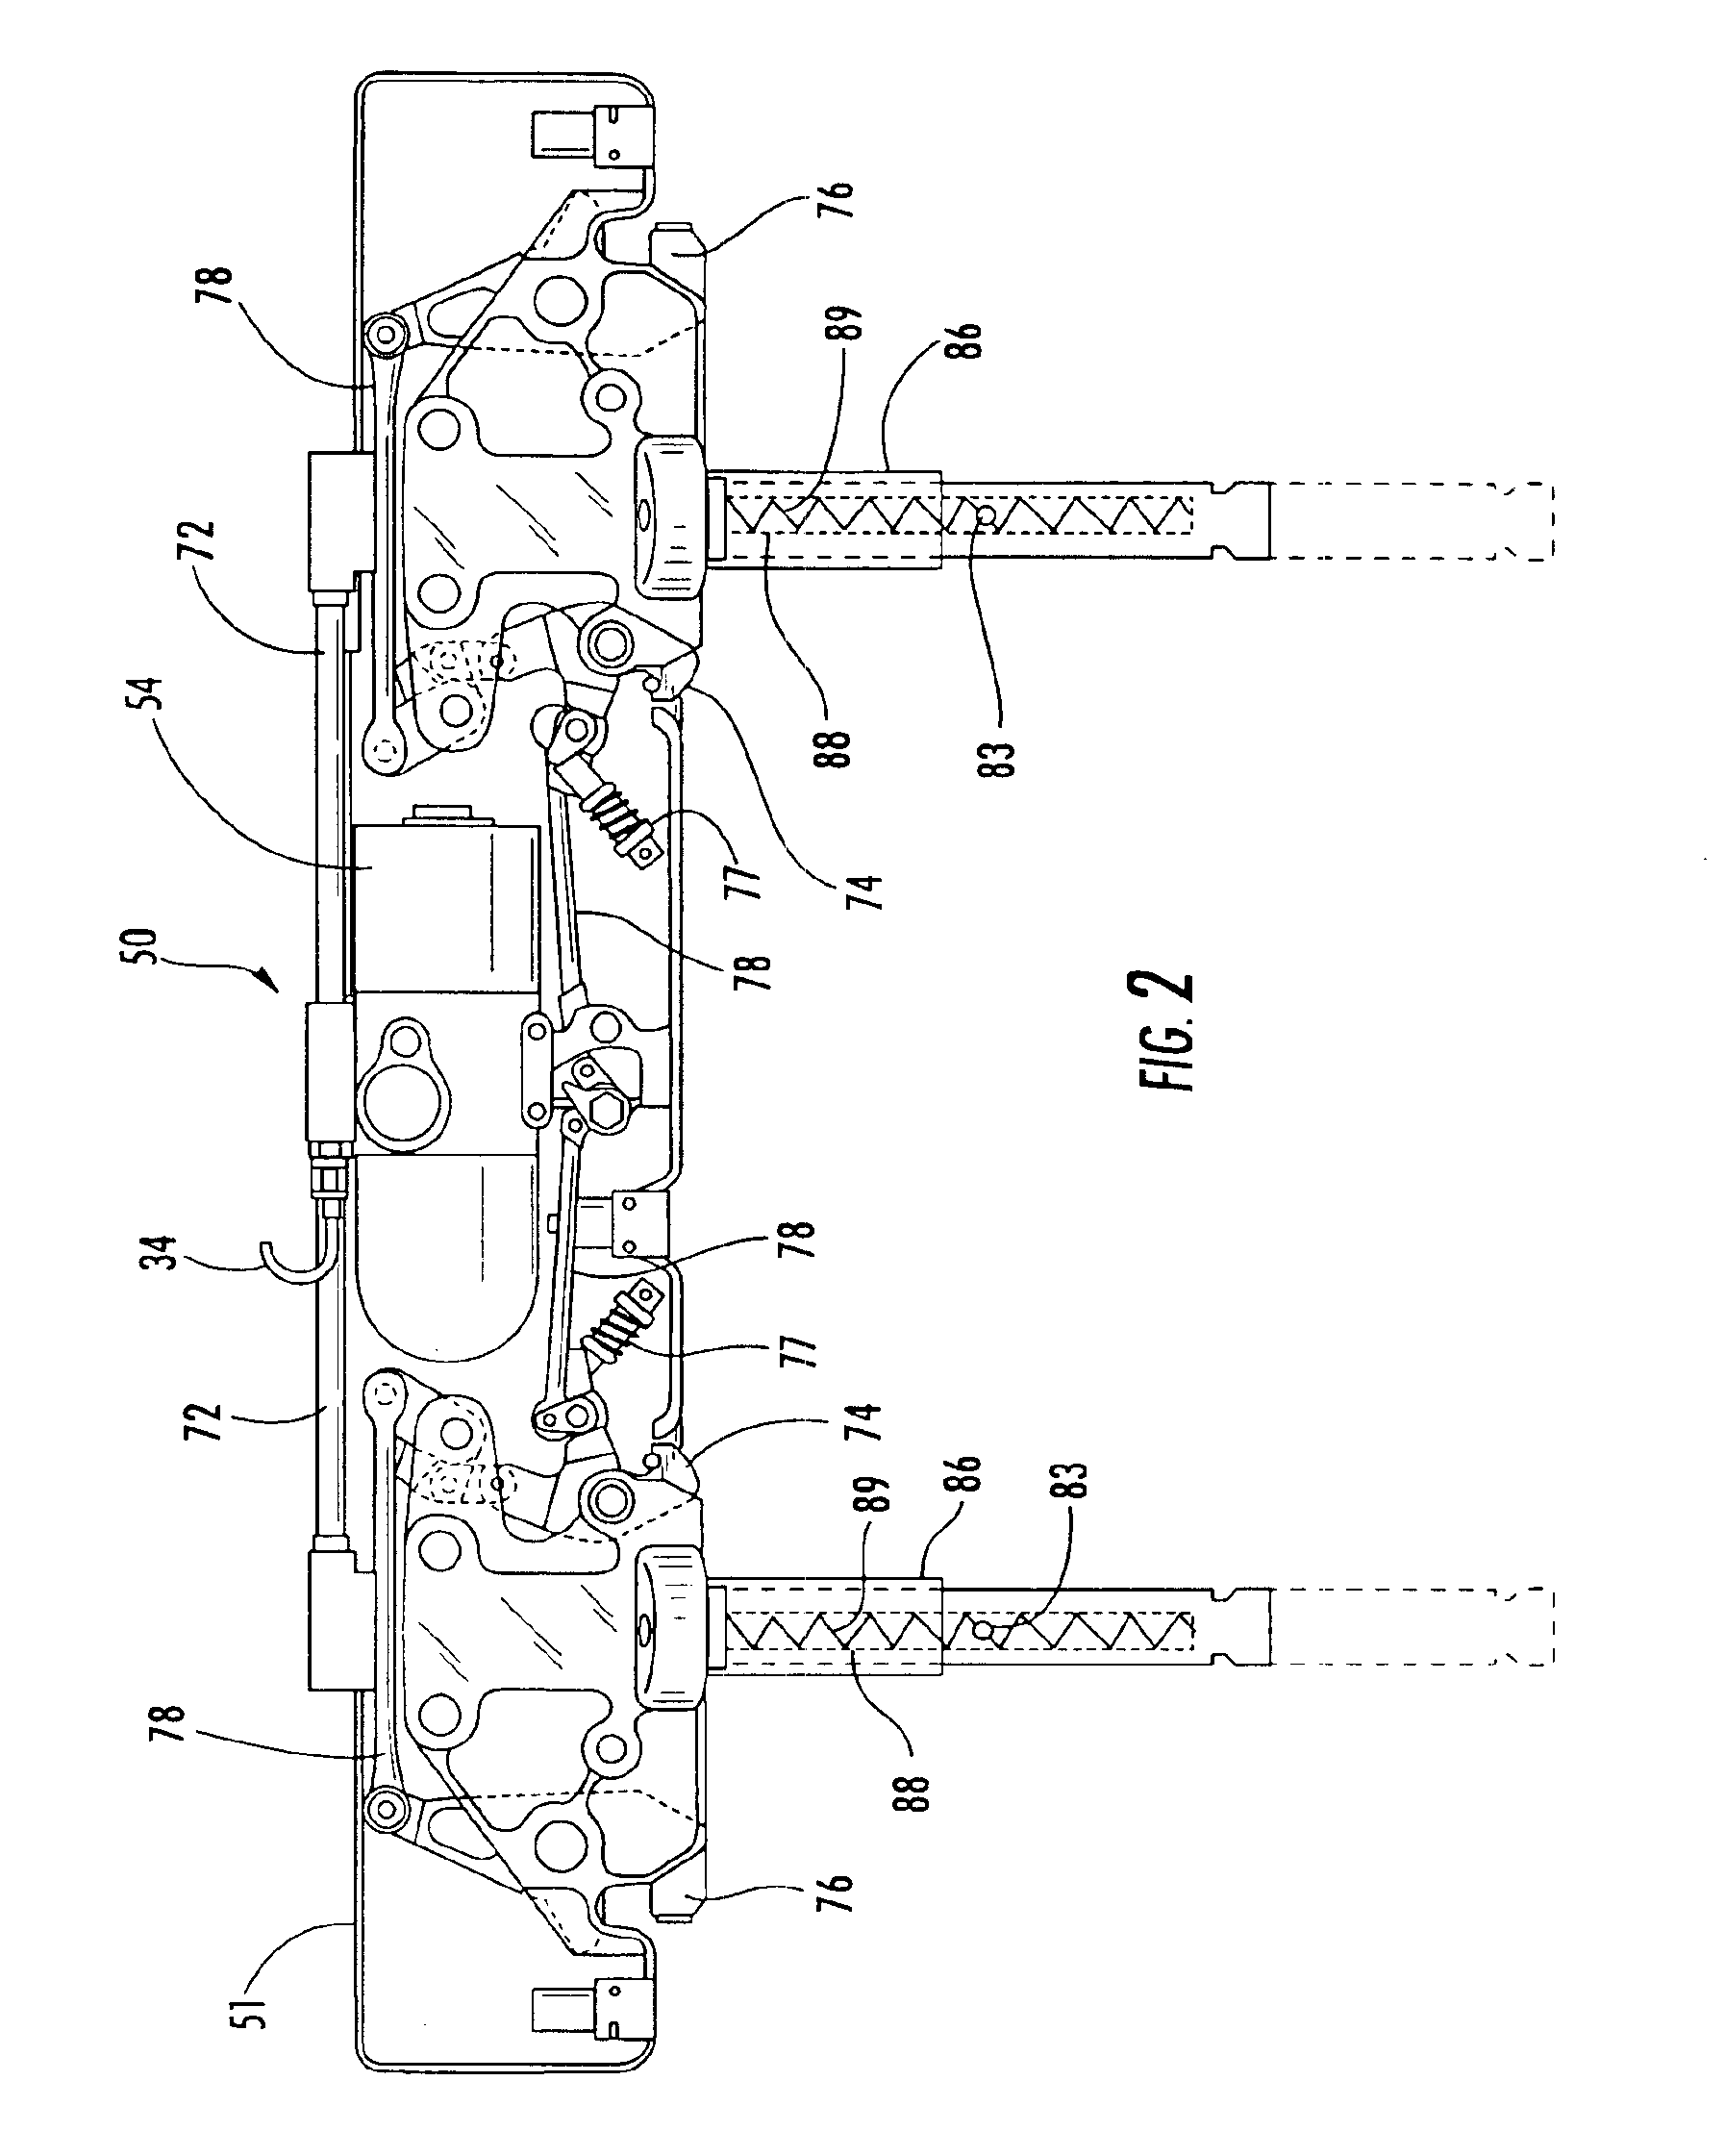 Store ejection system with disposable pressure vessel and associated method of operation